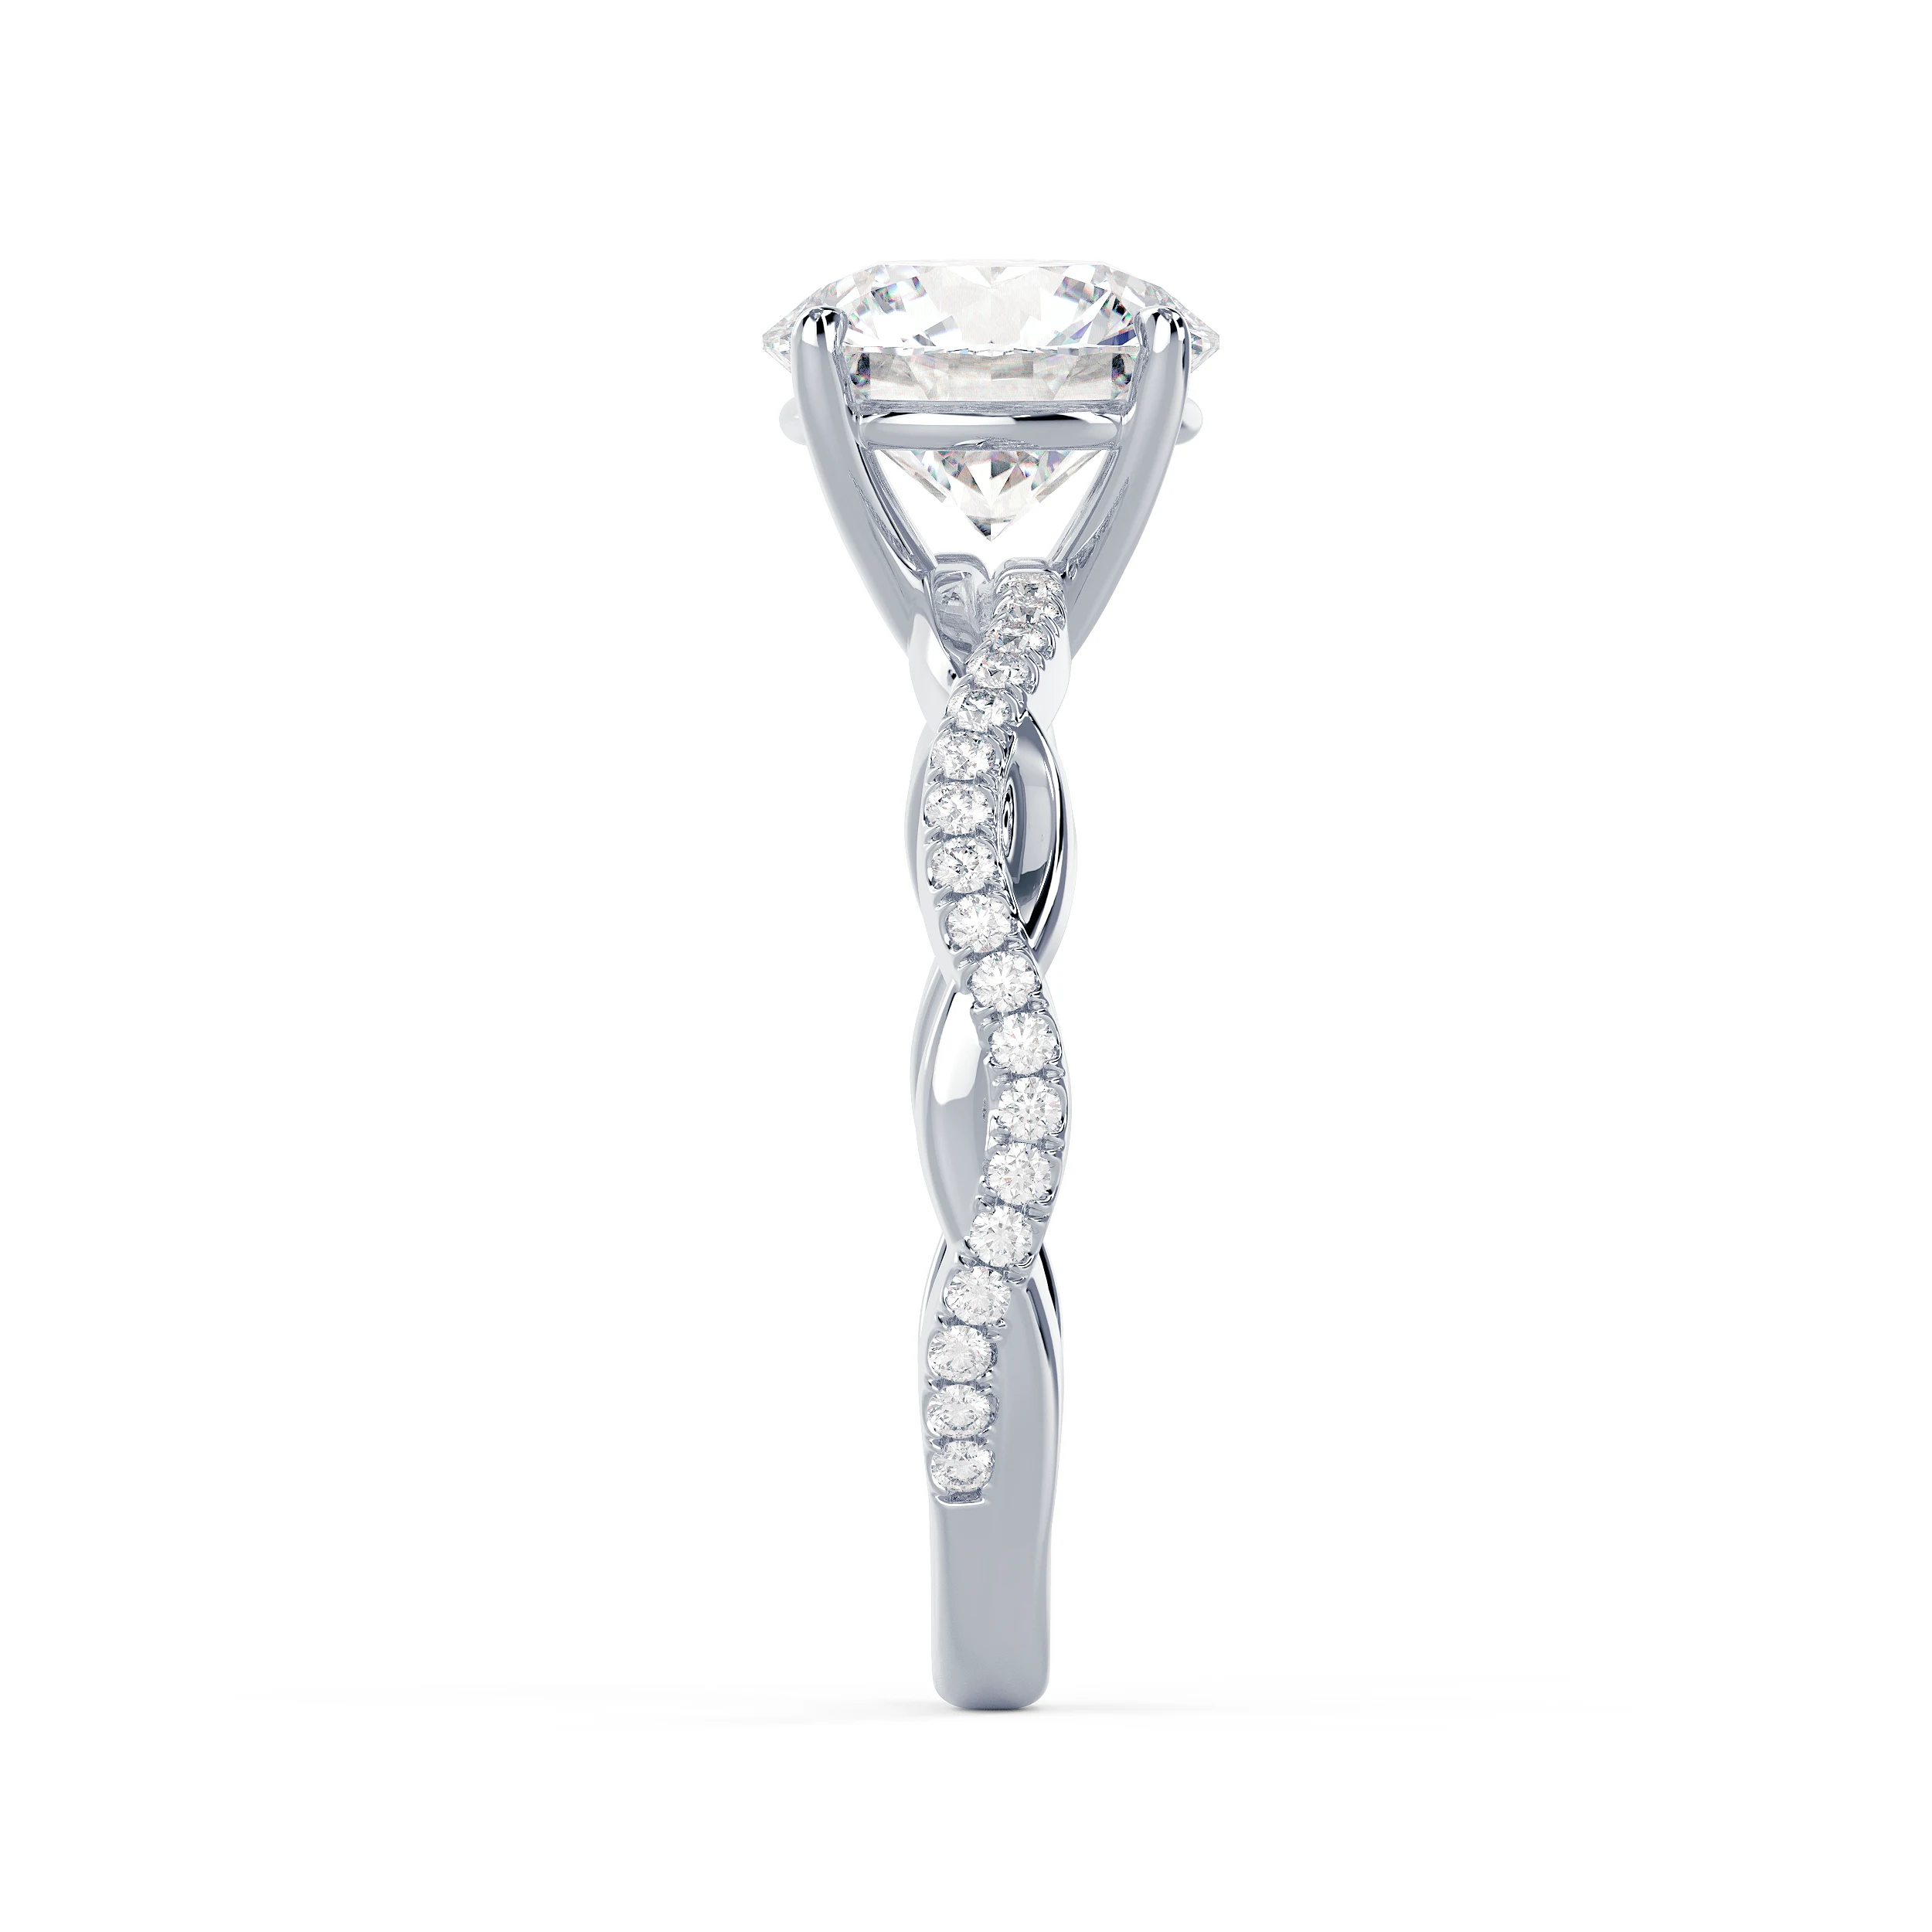 Hand Selected Diamonds set in White Gold Infinity Twist Diamond Engagement Ring (Side View)